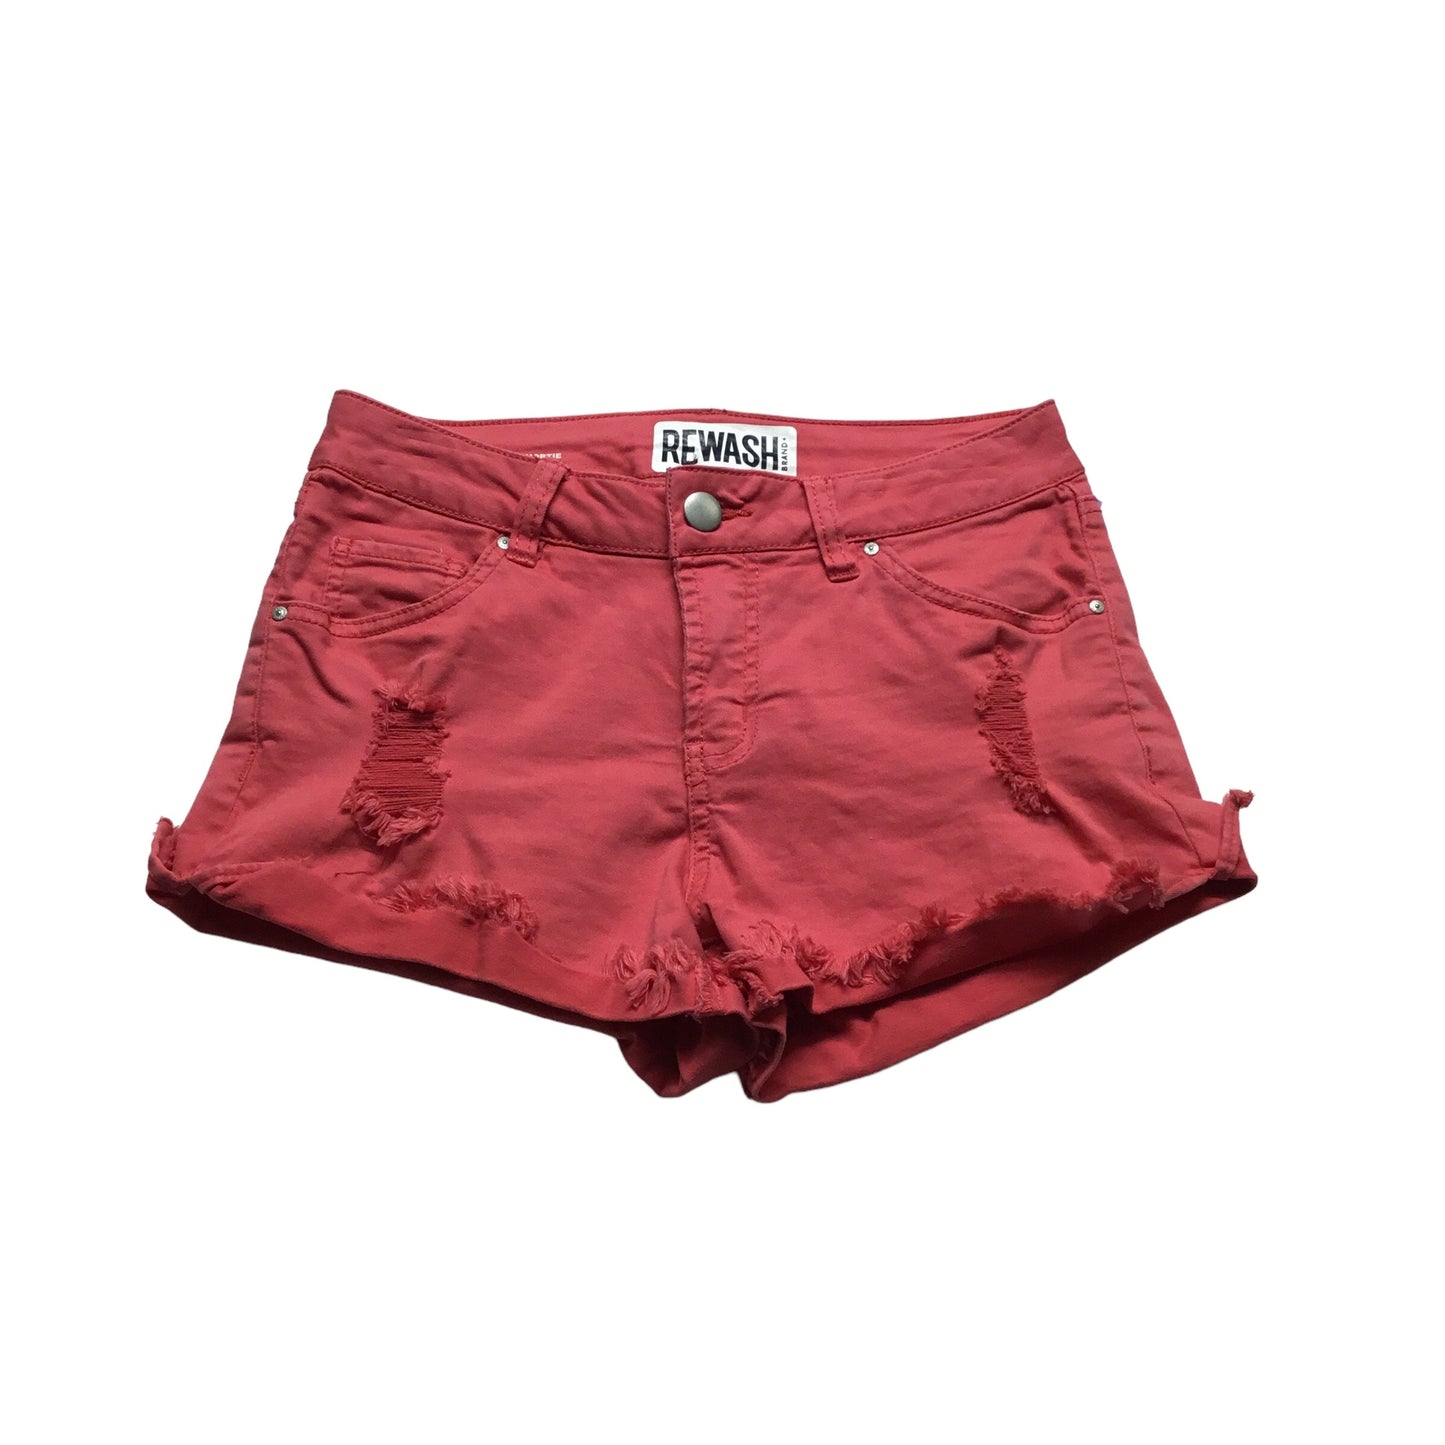 Shorts By Clothes Mentor  Size: 2